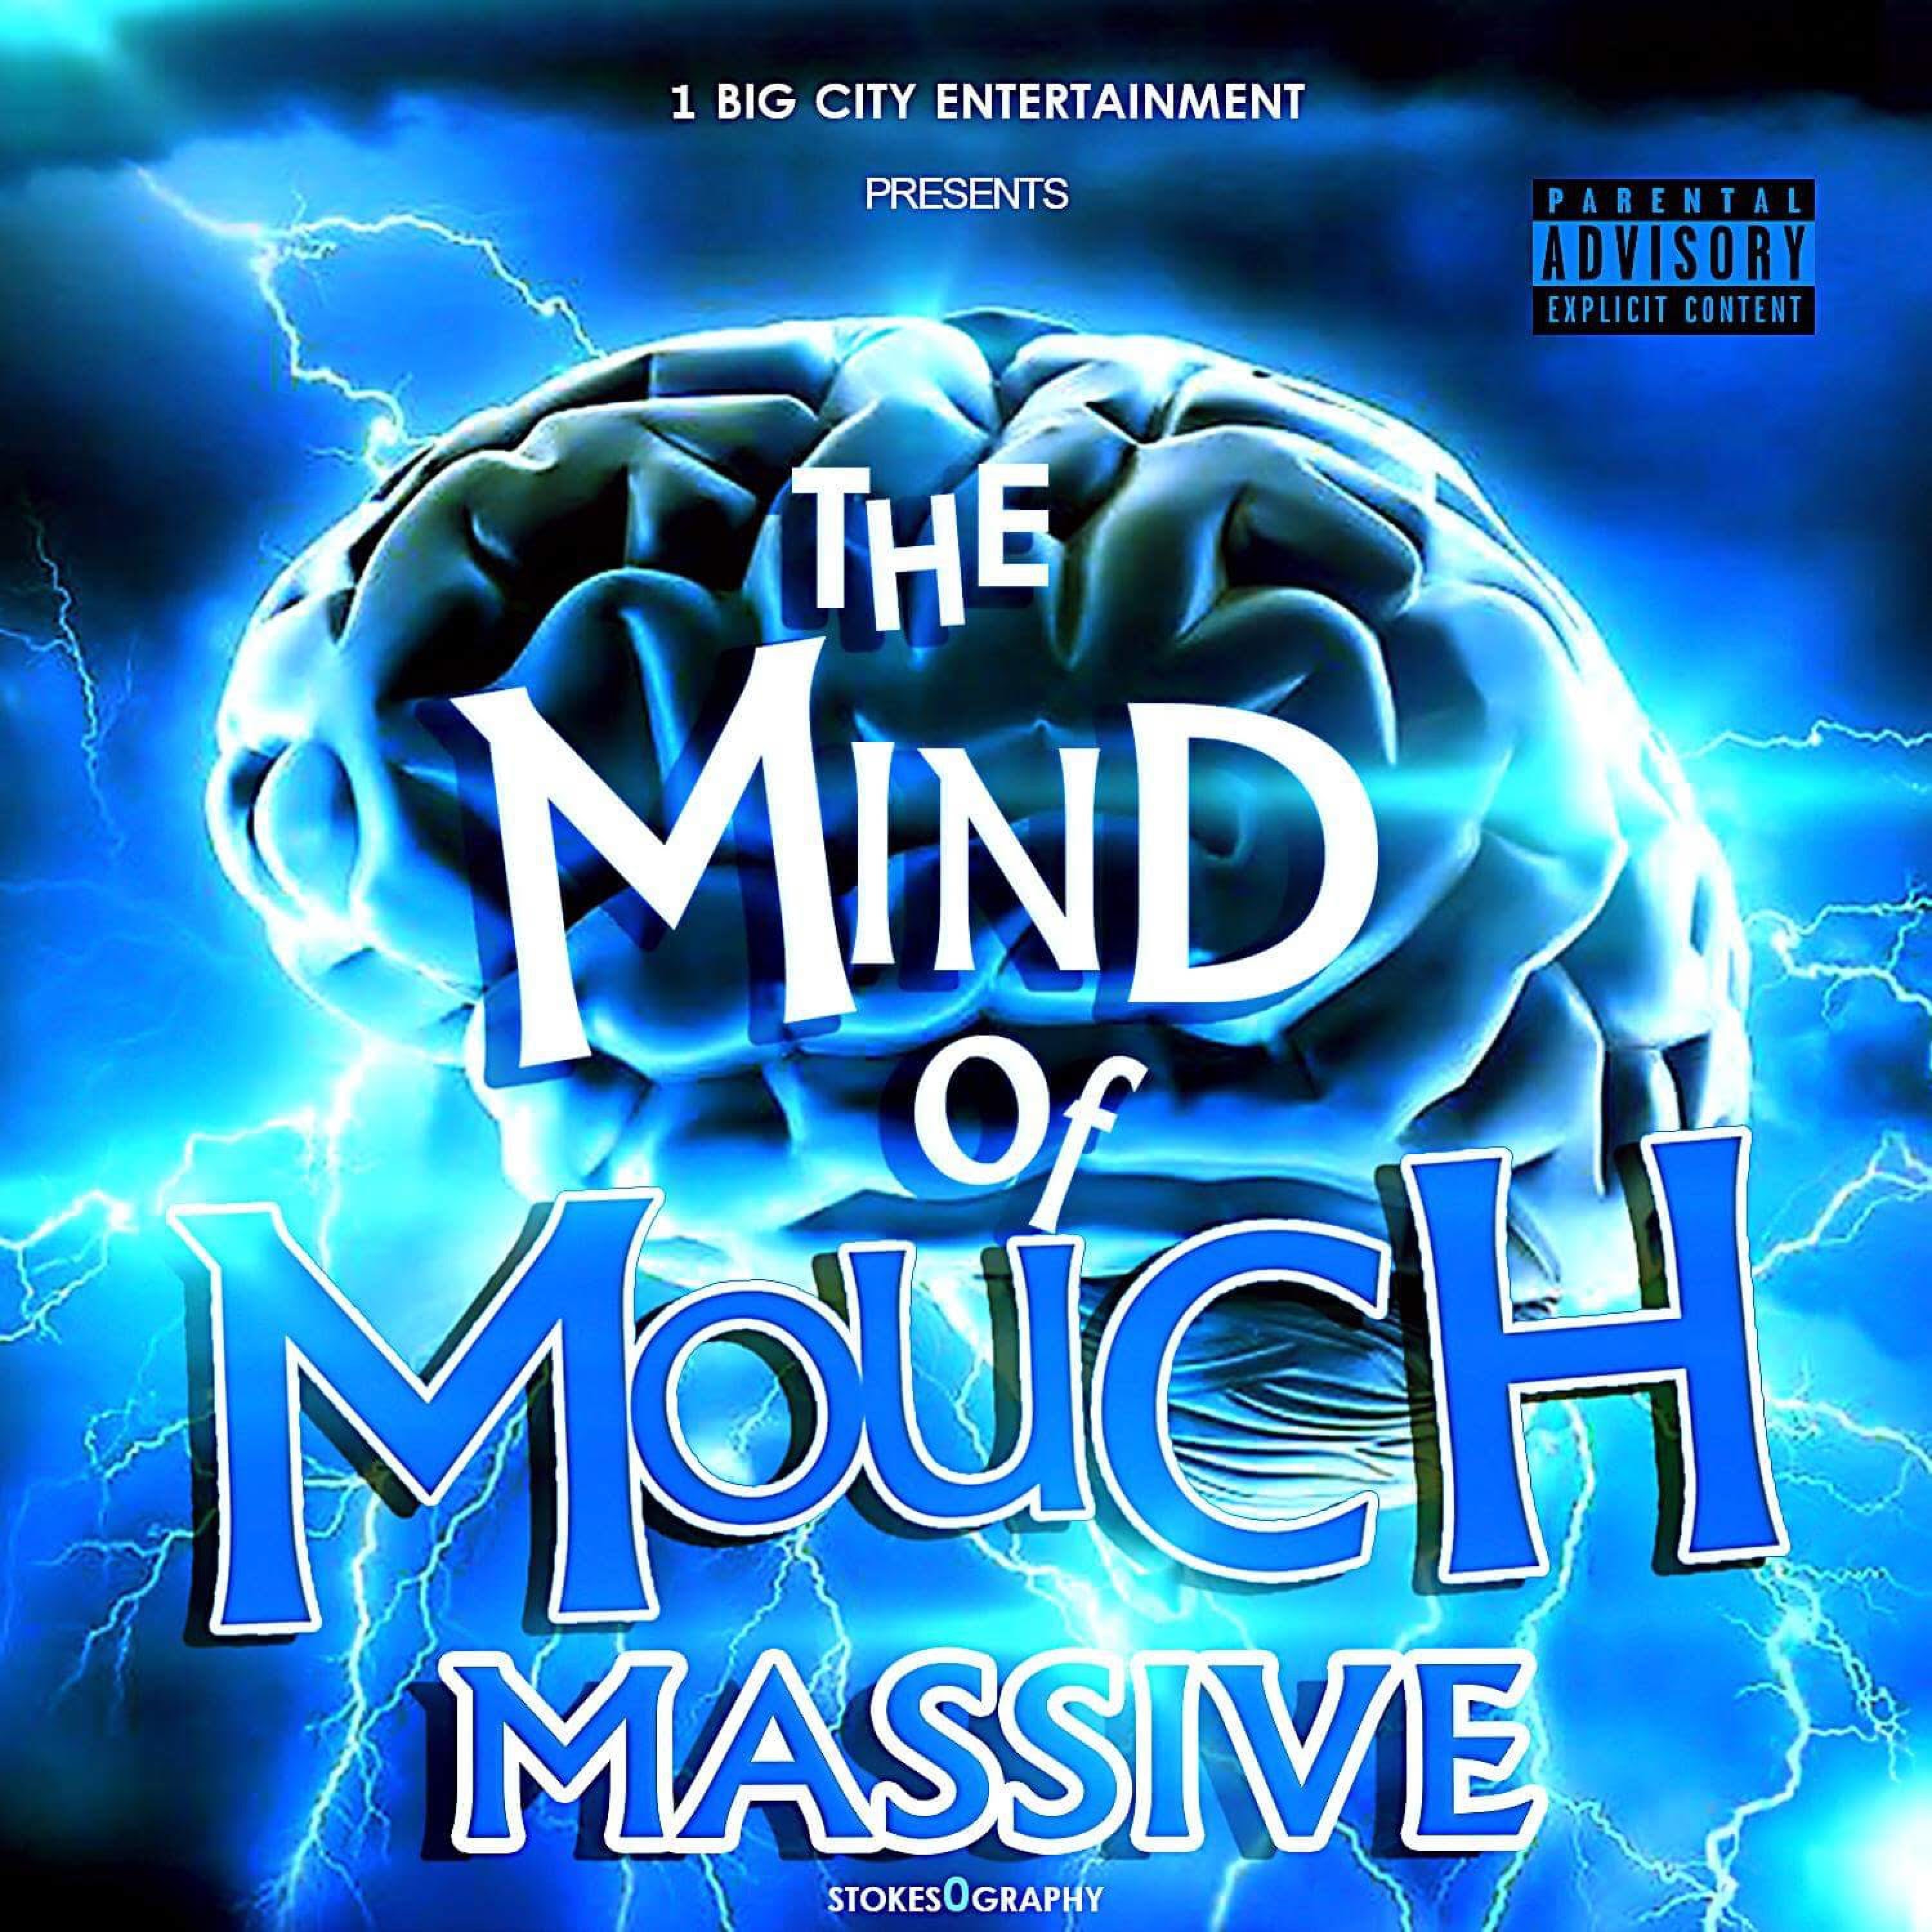 The Mind of Mouch Massive